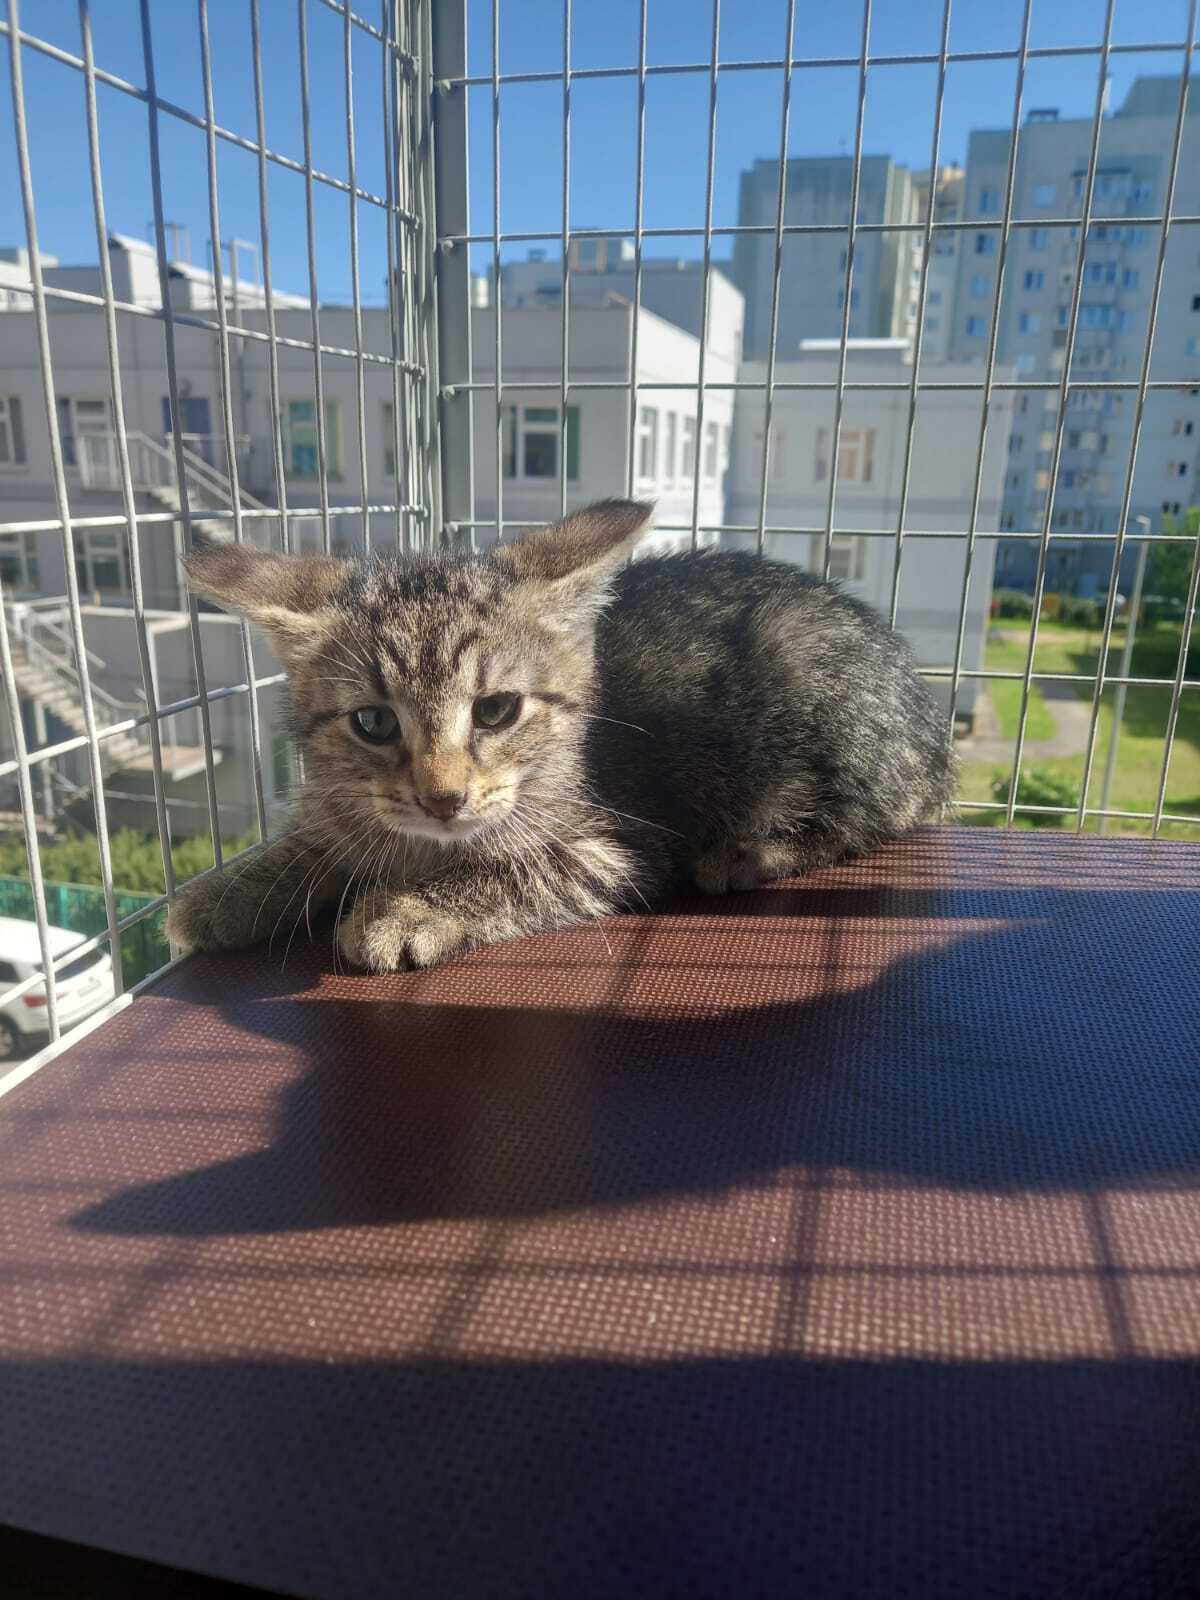 I sit high and look far away. A kitten in kind and affectionate hands - cat, No rating, Helping animals, Kittens, Saint Petersburg, Homeless animals, Longpost, VKontakte (link), In good hands